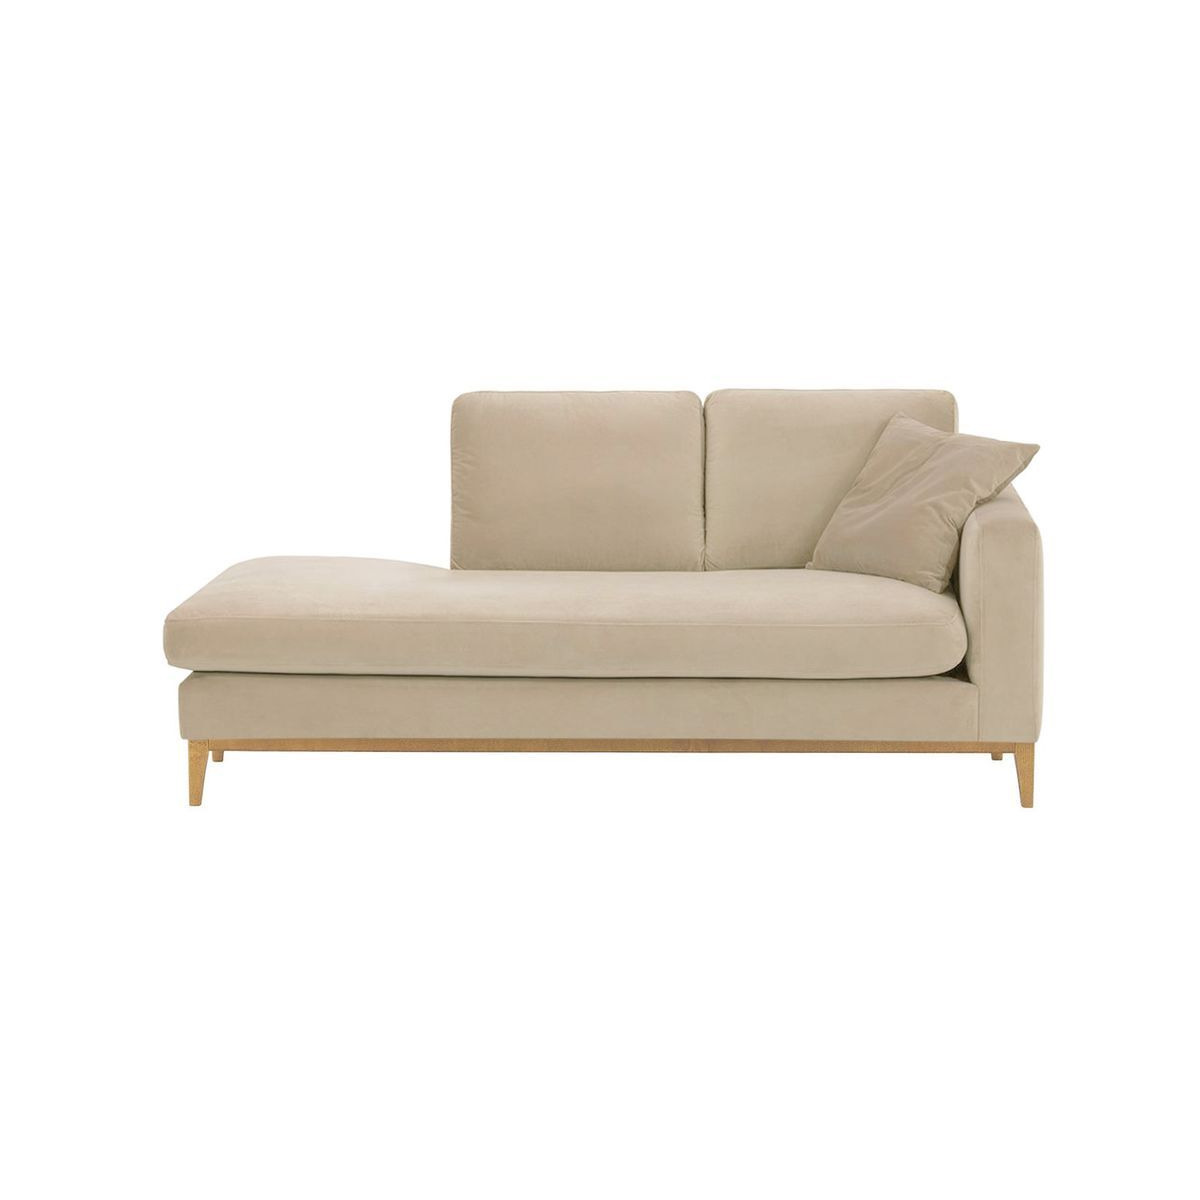 Covex Wood Right-Hand Daybed, light beige, Leg colour: like oak - image 1